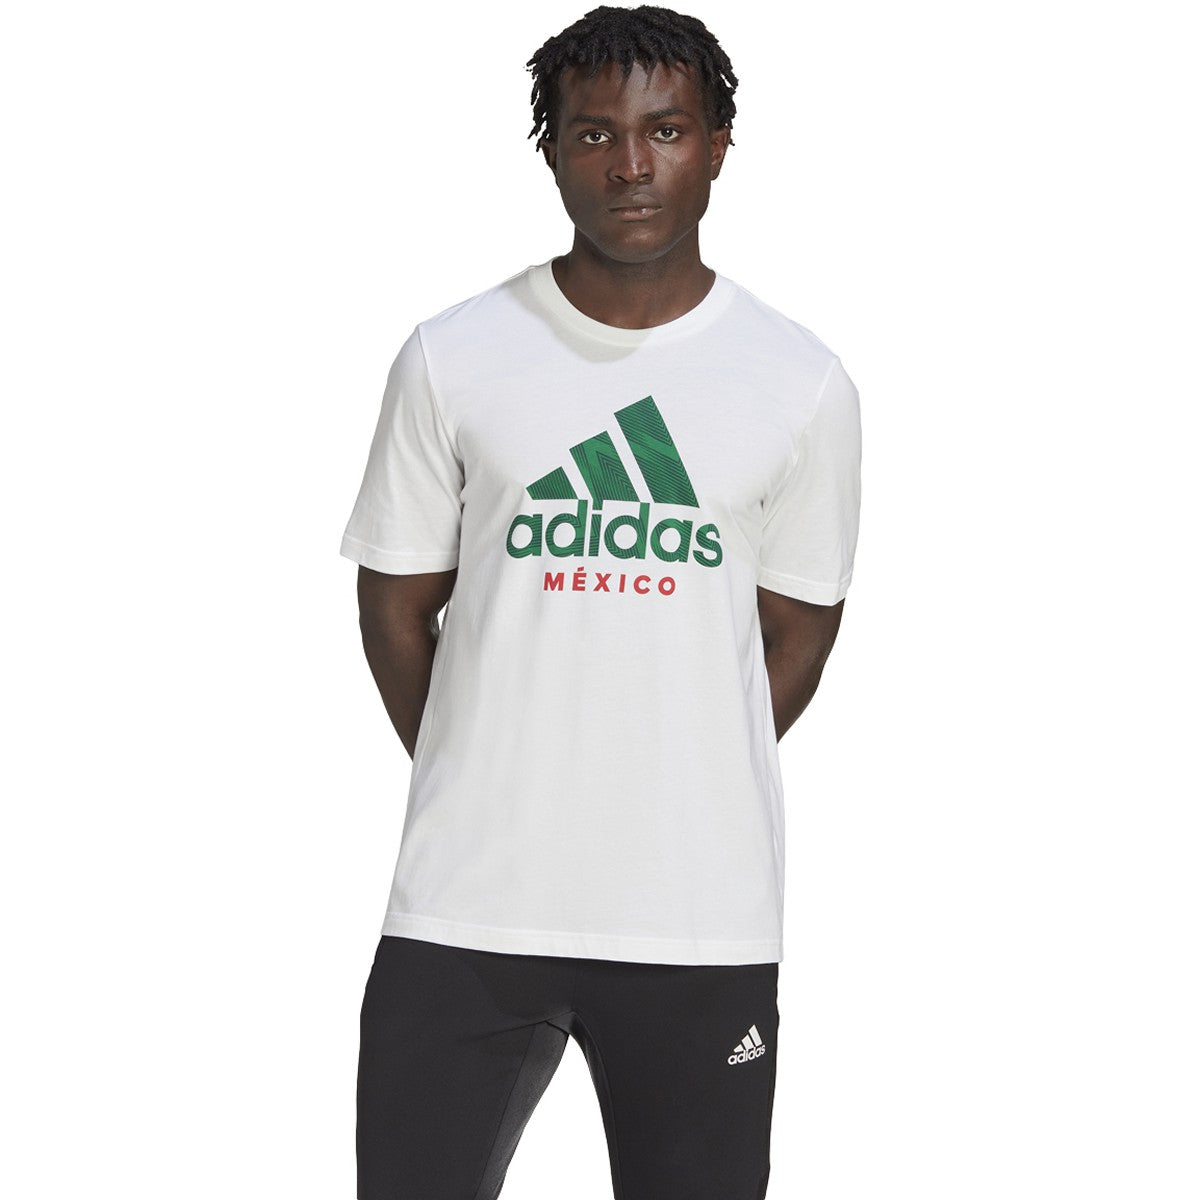 adidas Men's Mexico 2022 Graphic Tee | HF1436 Apparel Adidas Adult Small White 